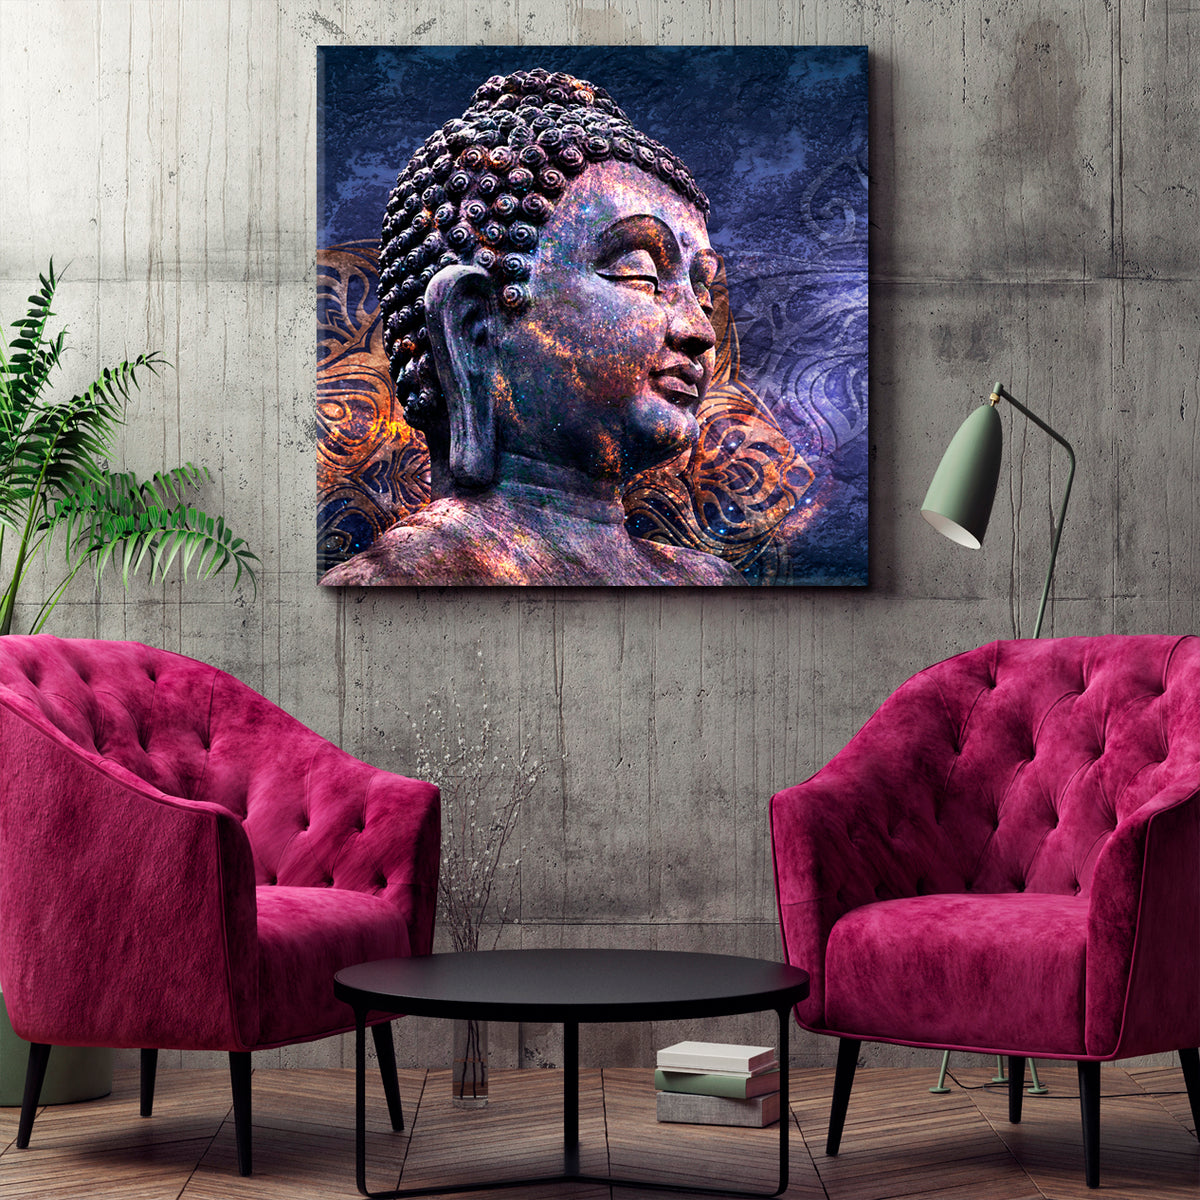 Head of Lord Buddha Profile Multicolored Psychedelic Religious Modern Art Artesty 1 Panel 12"x12" 